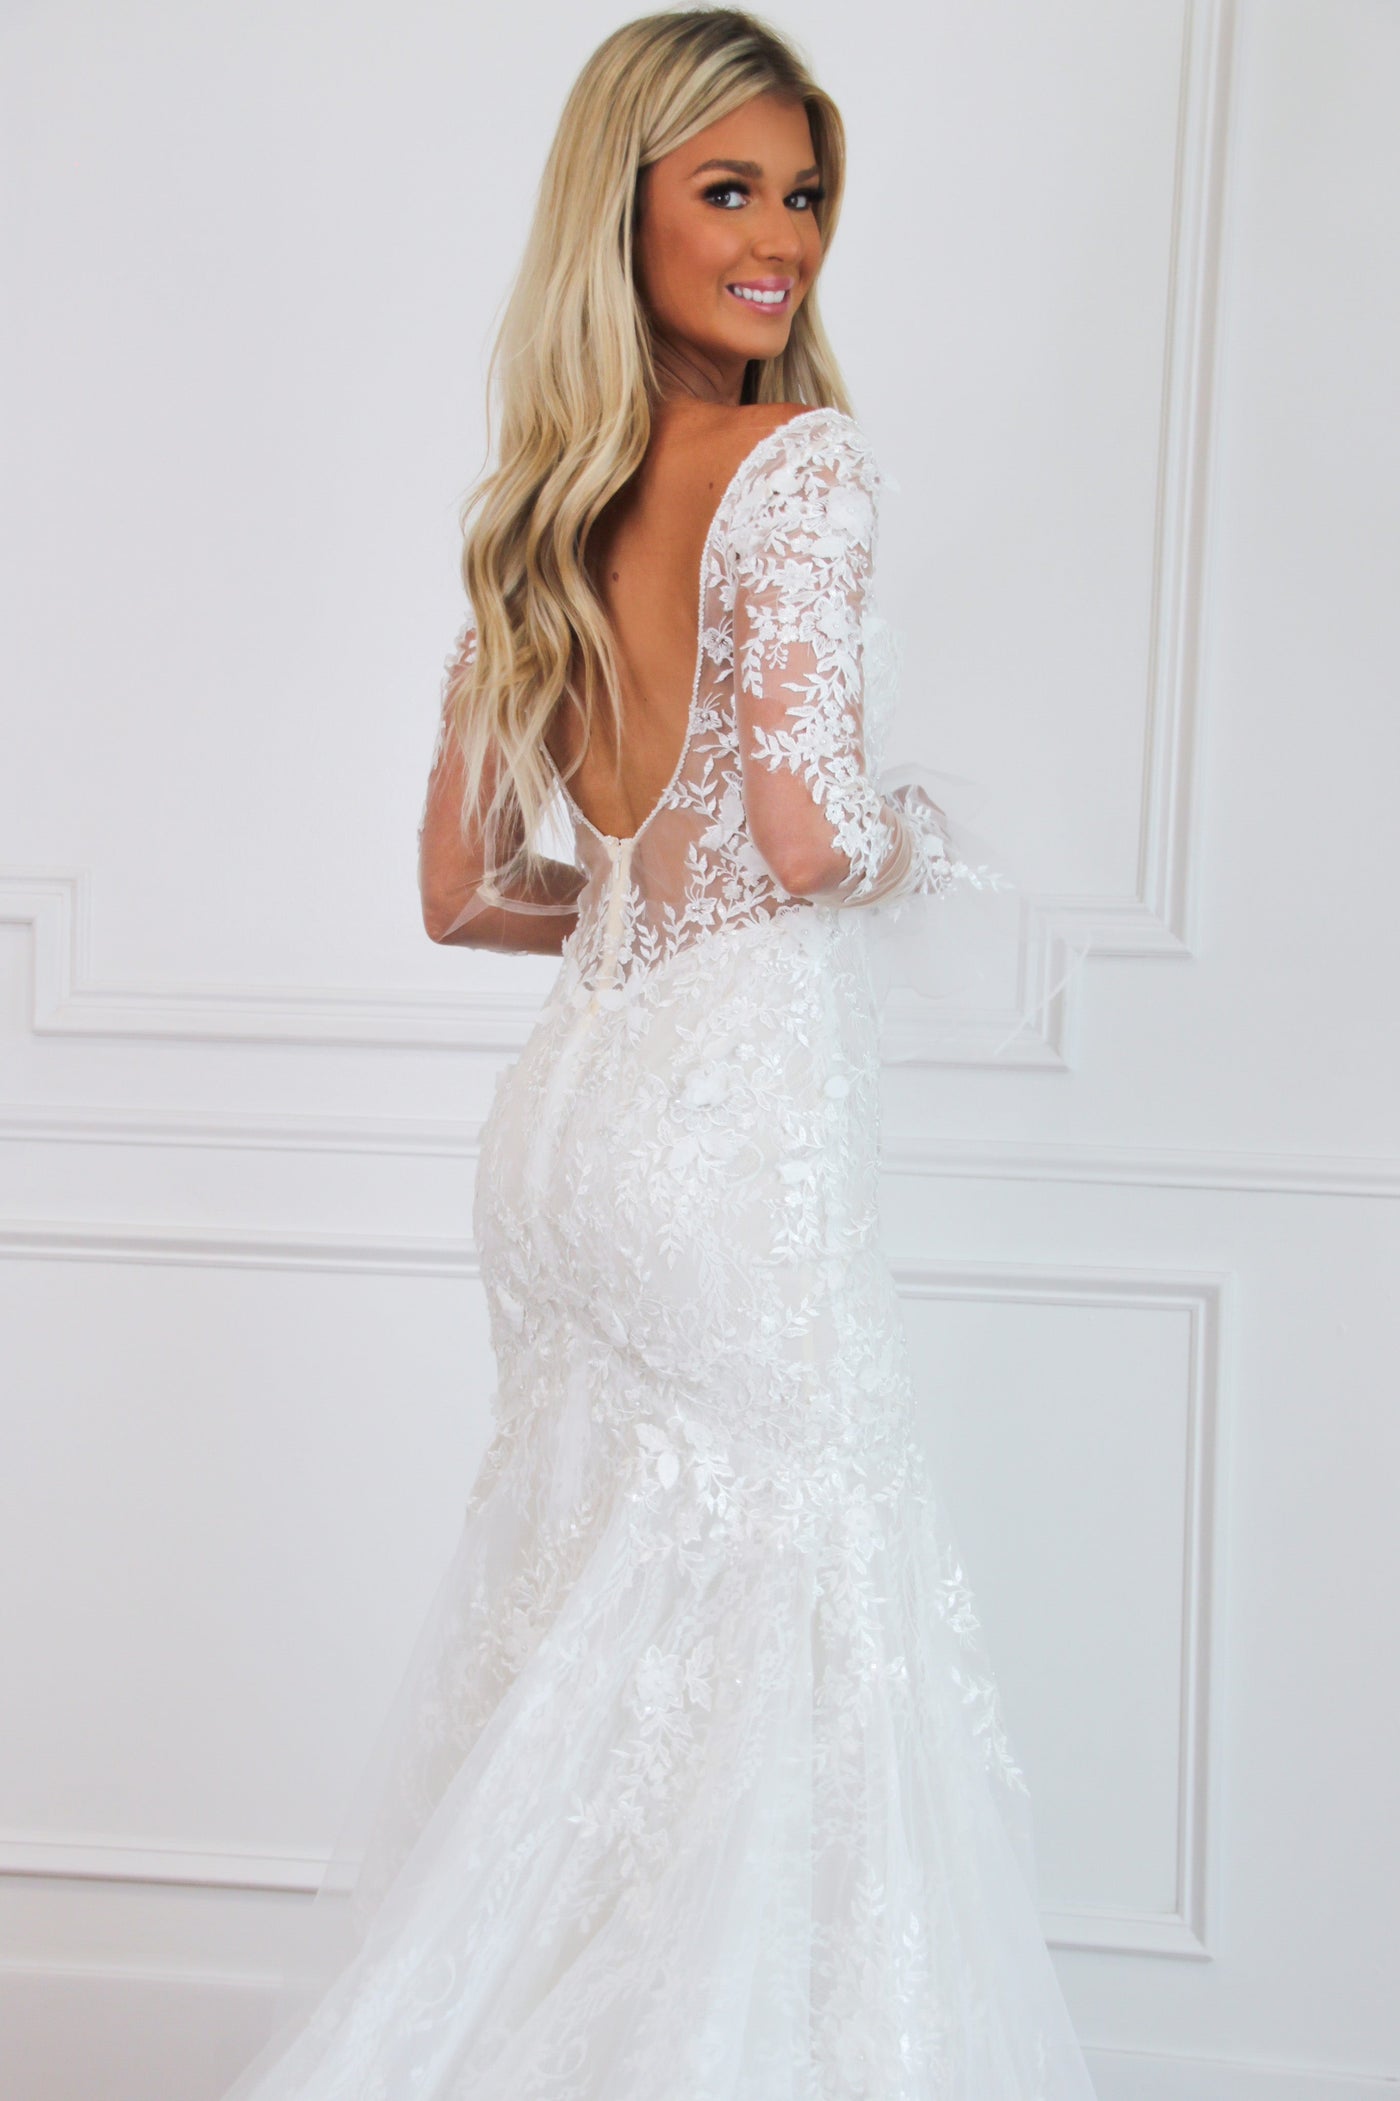 Giselle Floral Applique Long Sleeve Wedding Dress: Off White/Nude - Bella and Bloom Boutique